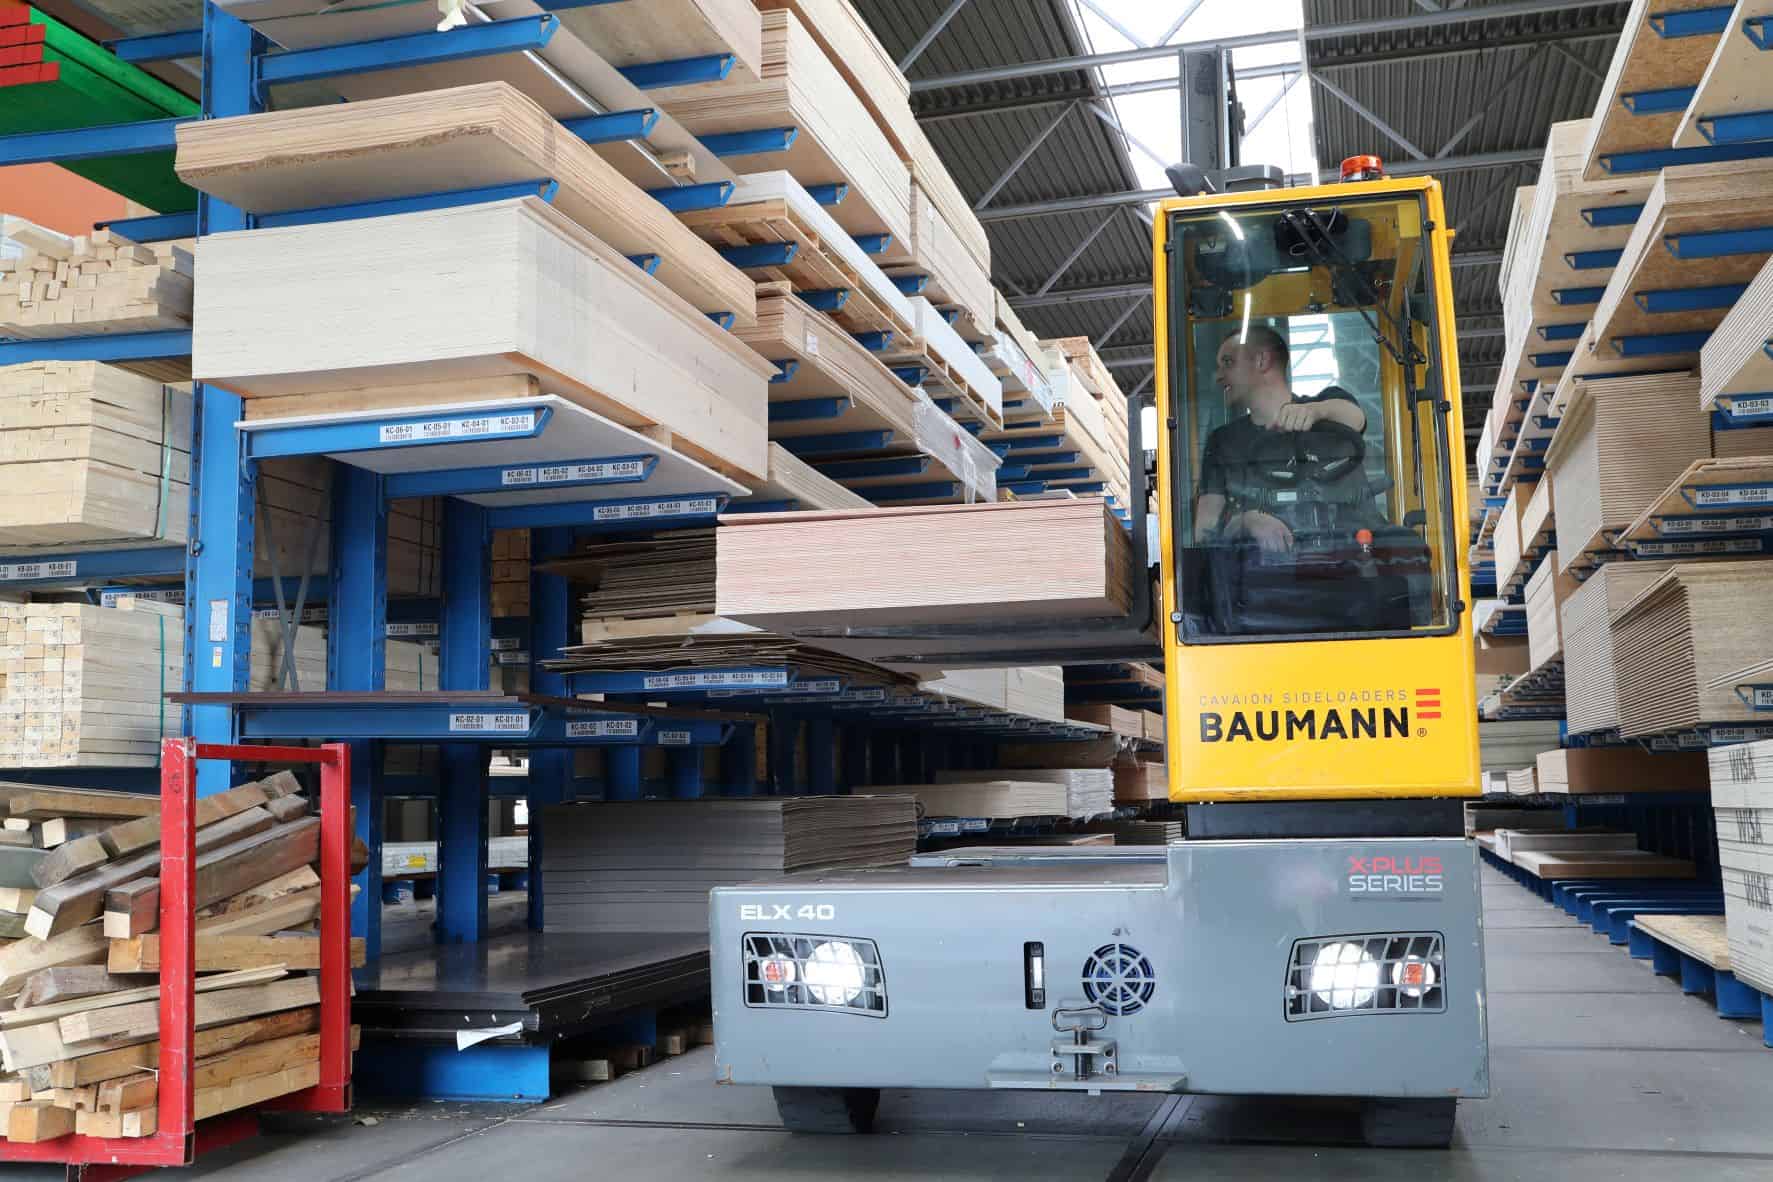 Baumann electric sideloader working in narrow aisle with cantilever racking